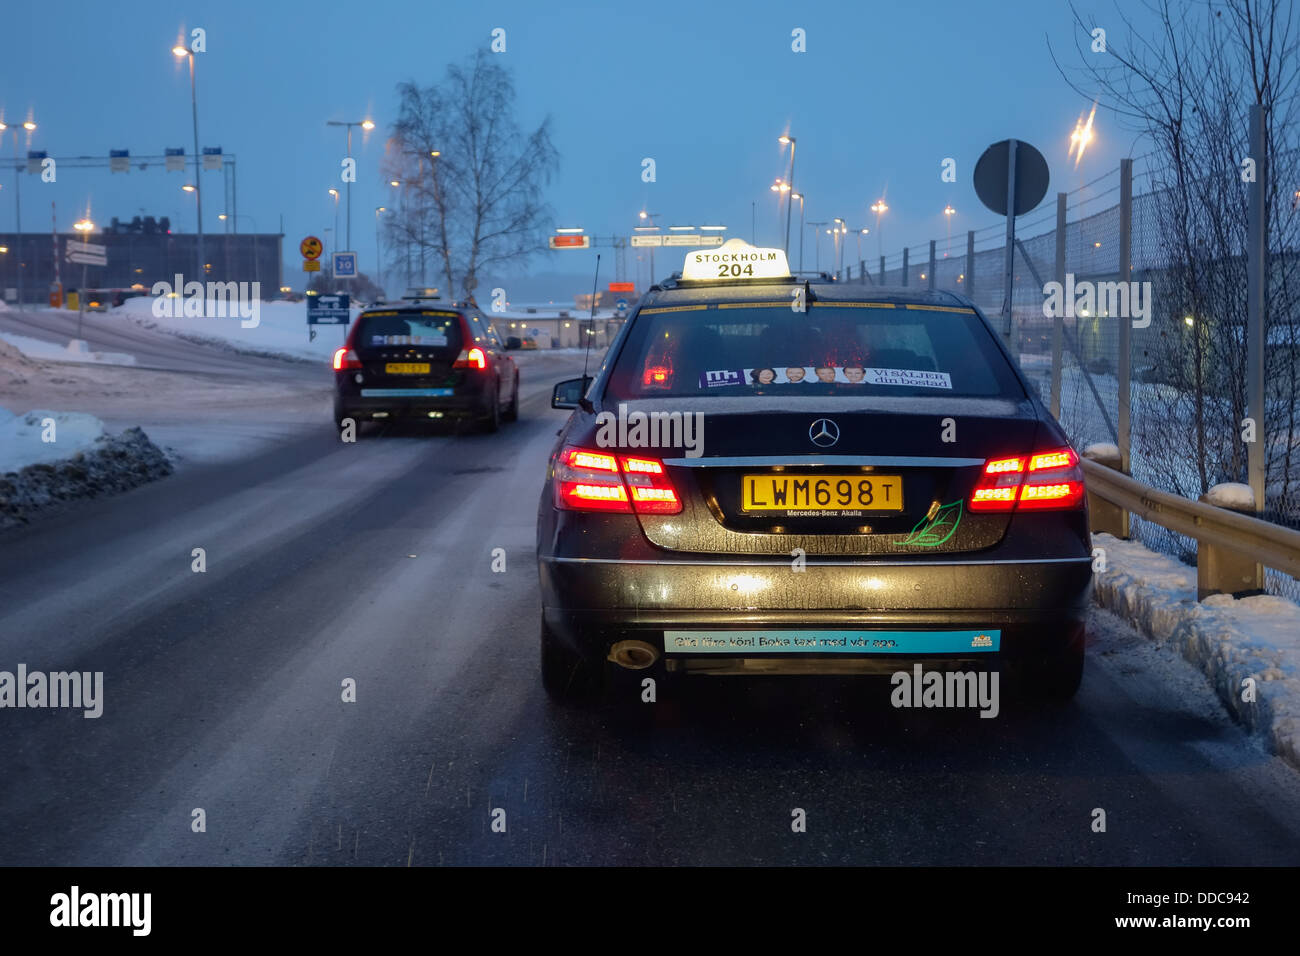 Stockholmtaxi in bad weather Stock Photo